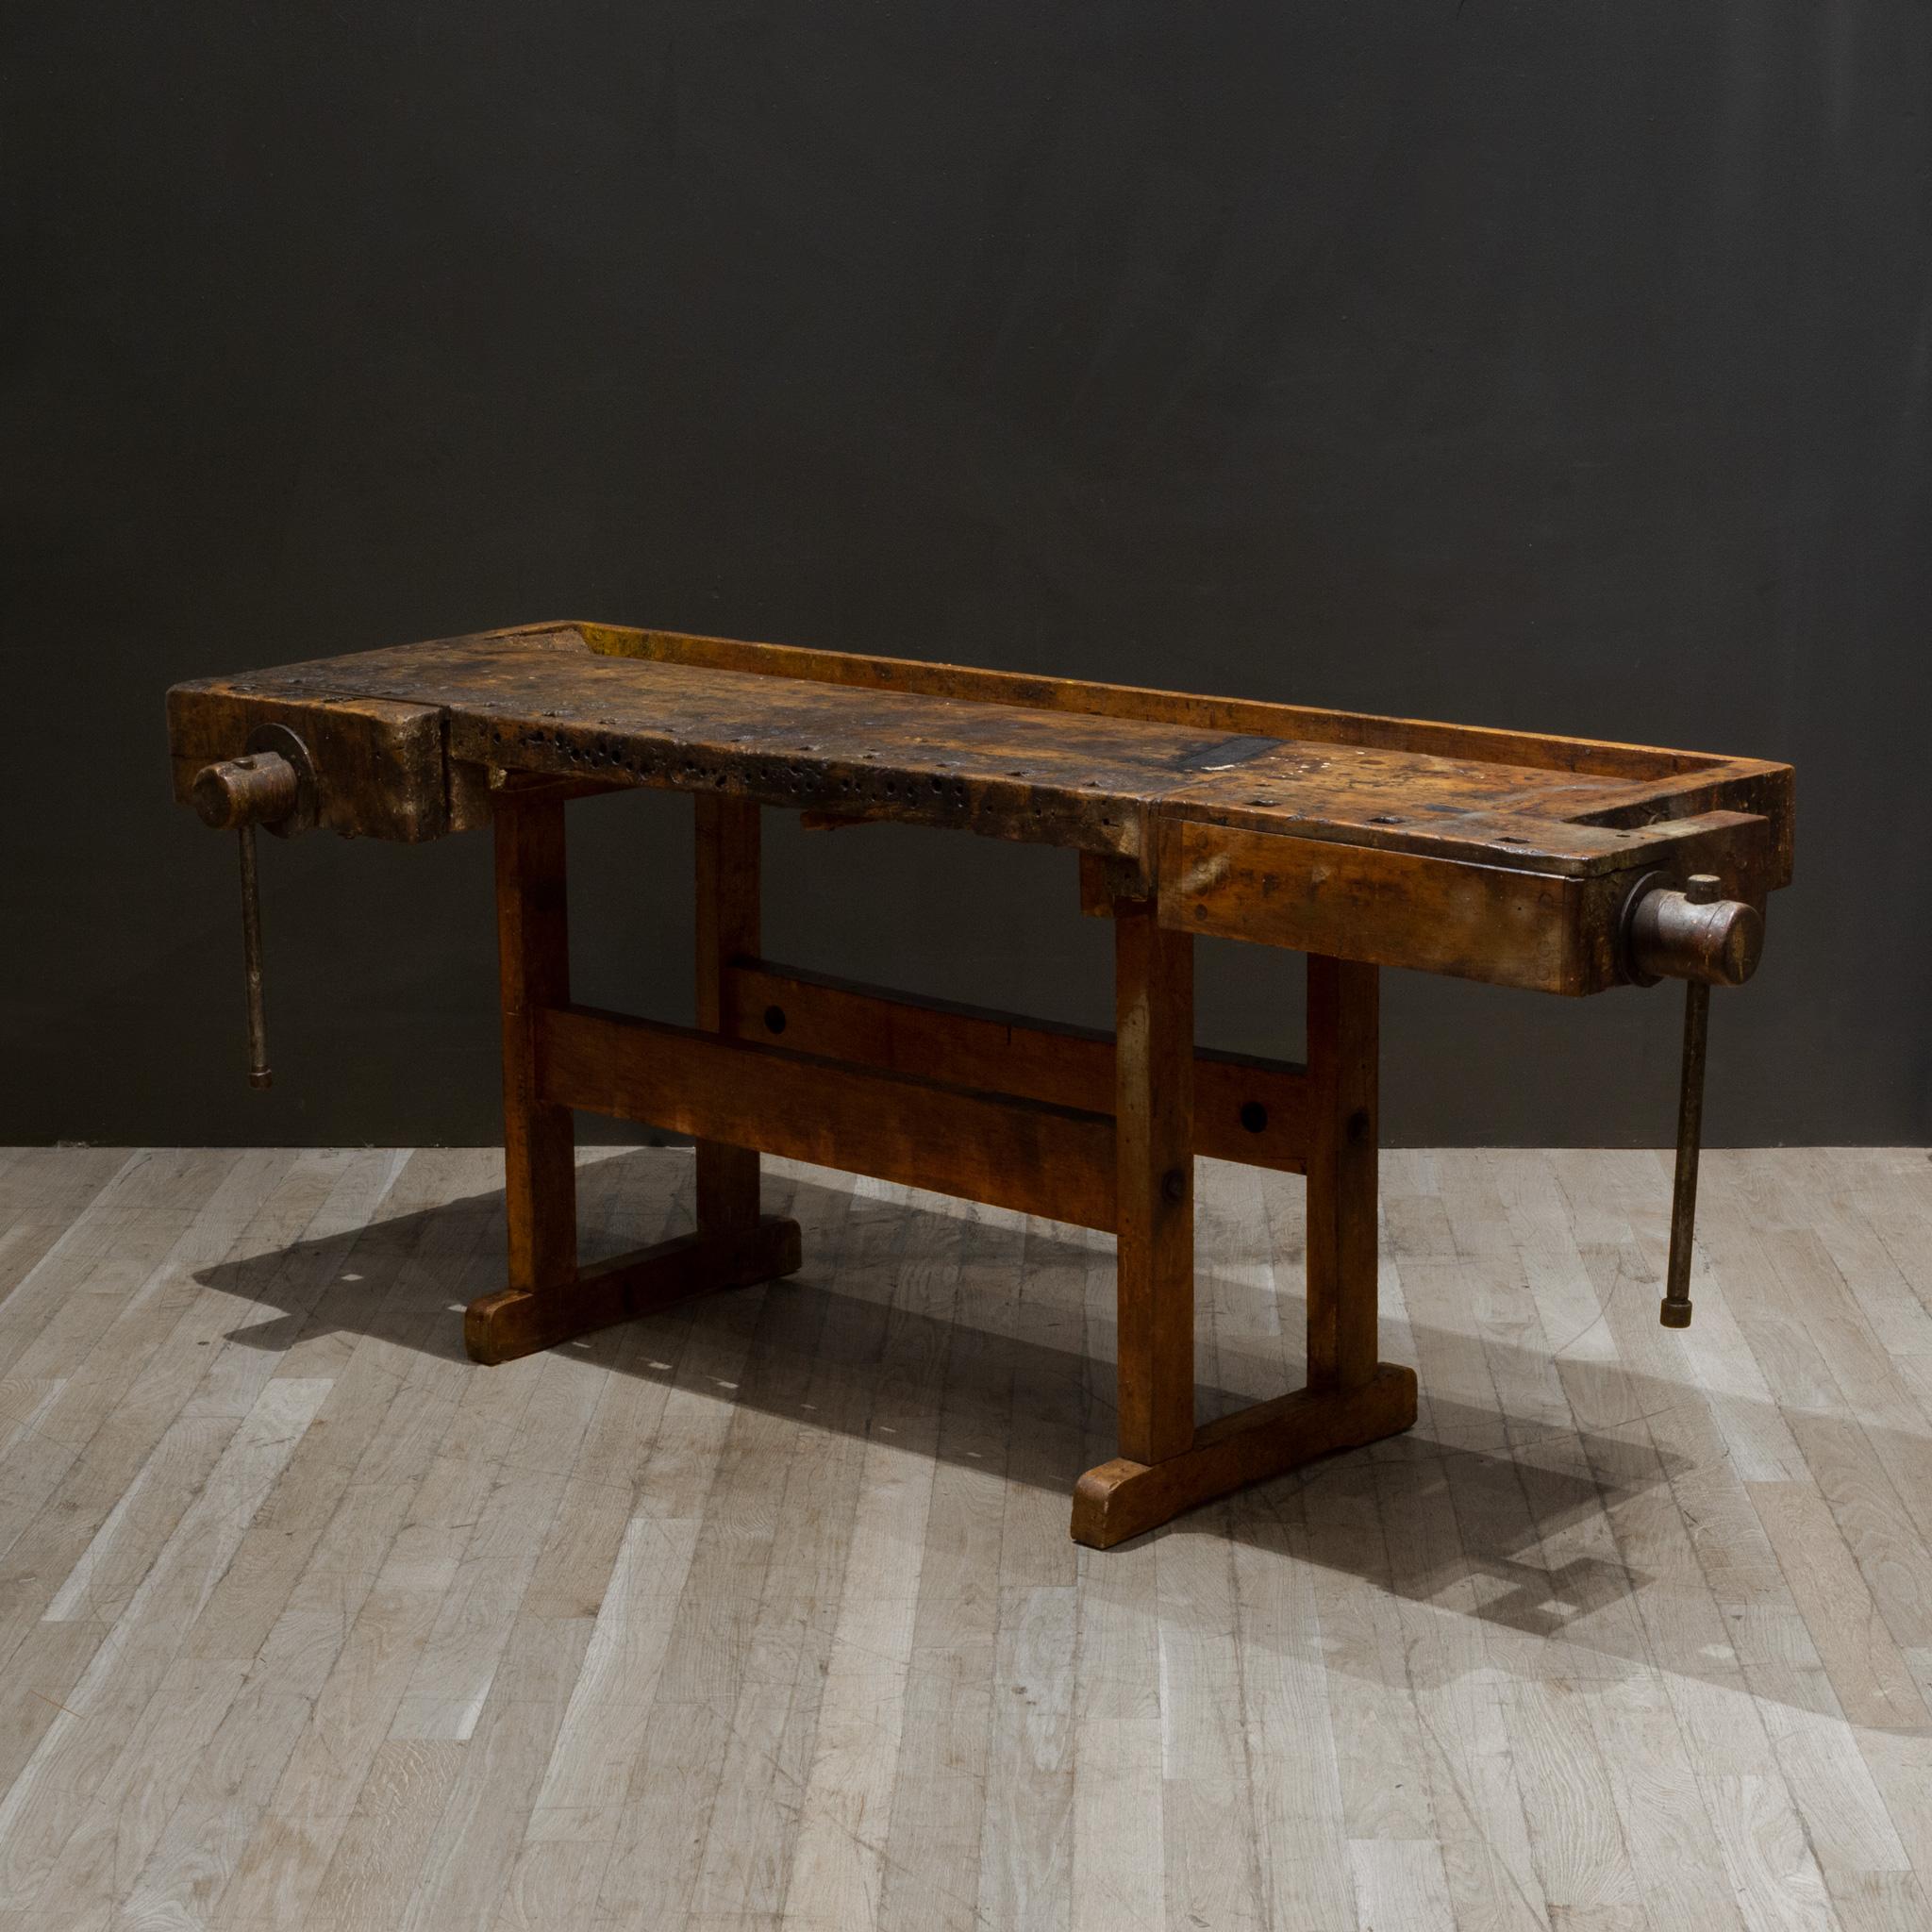 Industrial Late 19th/Early 20th c. Carpenter's Workbench c.1880-1920 For Sale